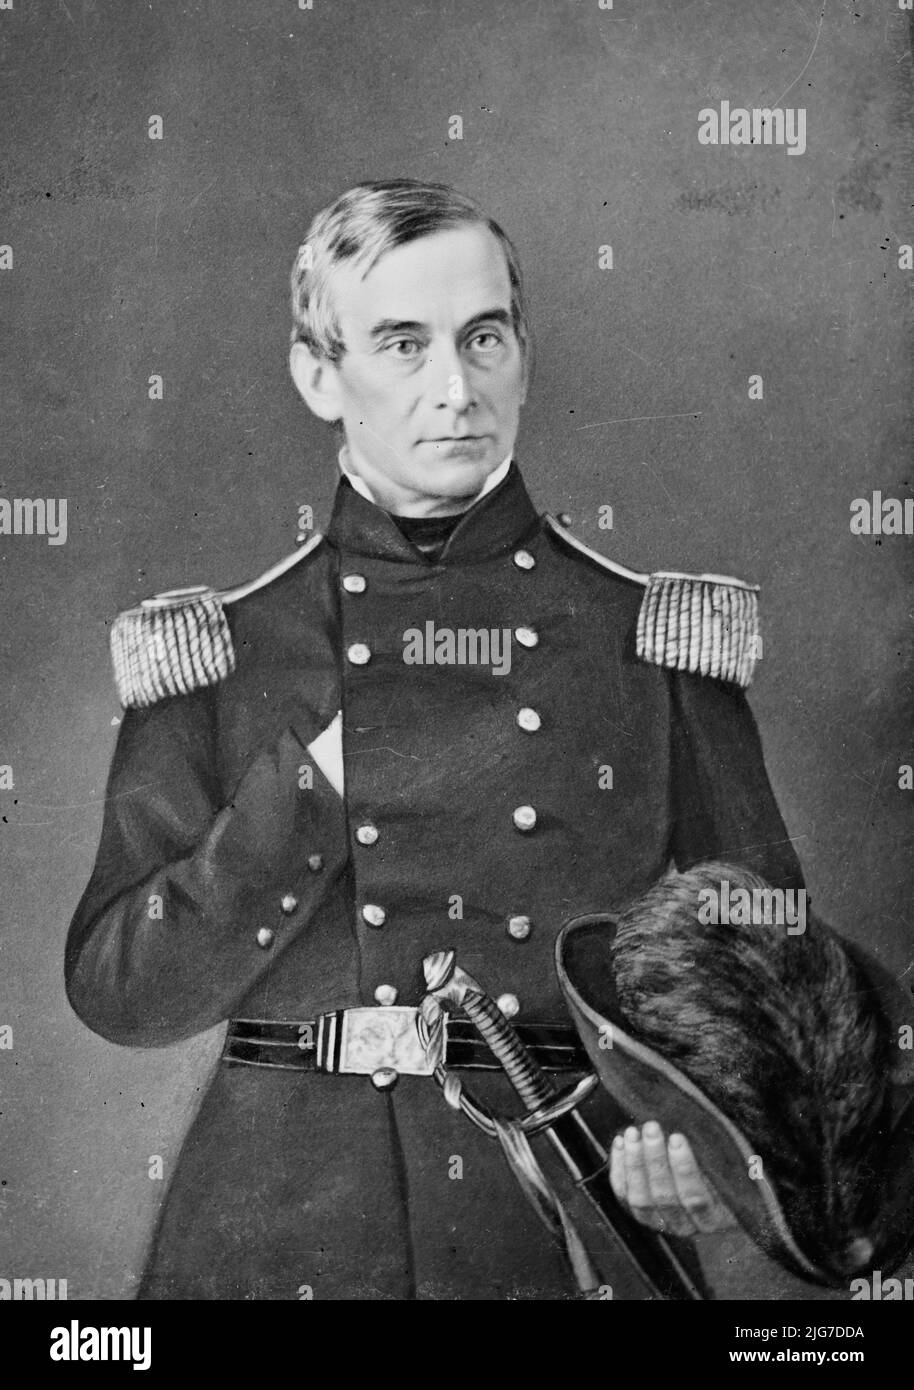 Robert Anderson, U.S.A., between 1855 and 1865. [Union commander in the first battle of the American Civil War at Fort Sumter]. Stock Photo